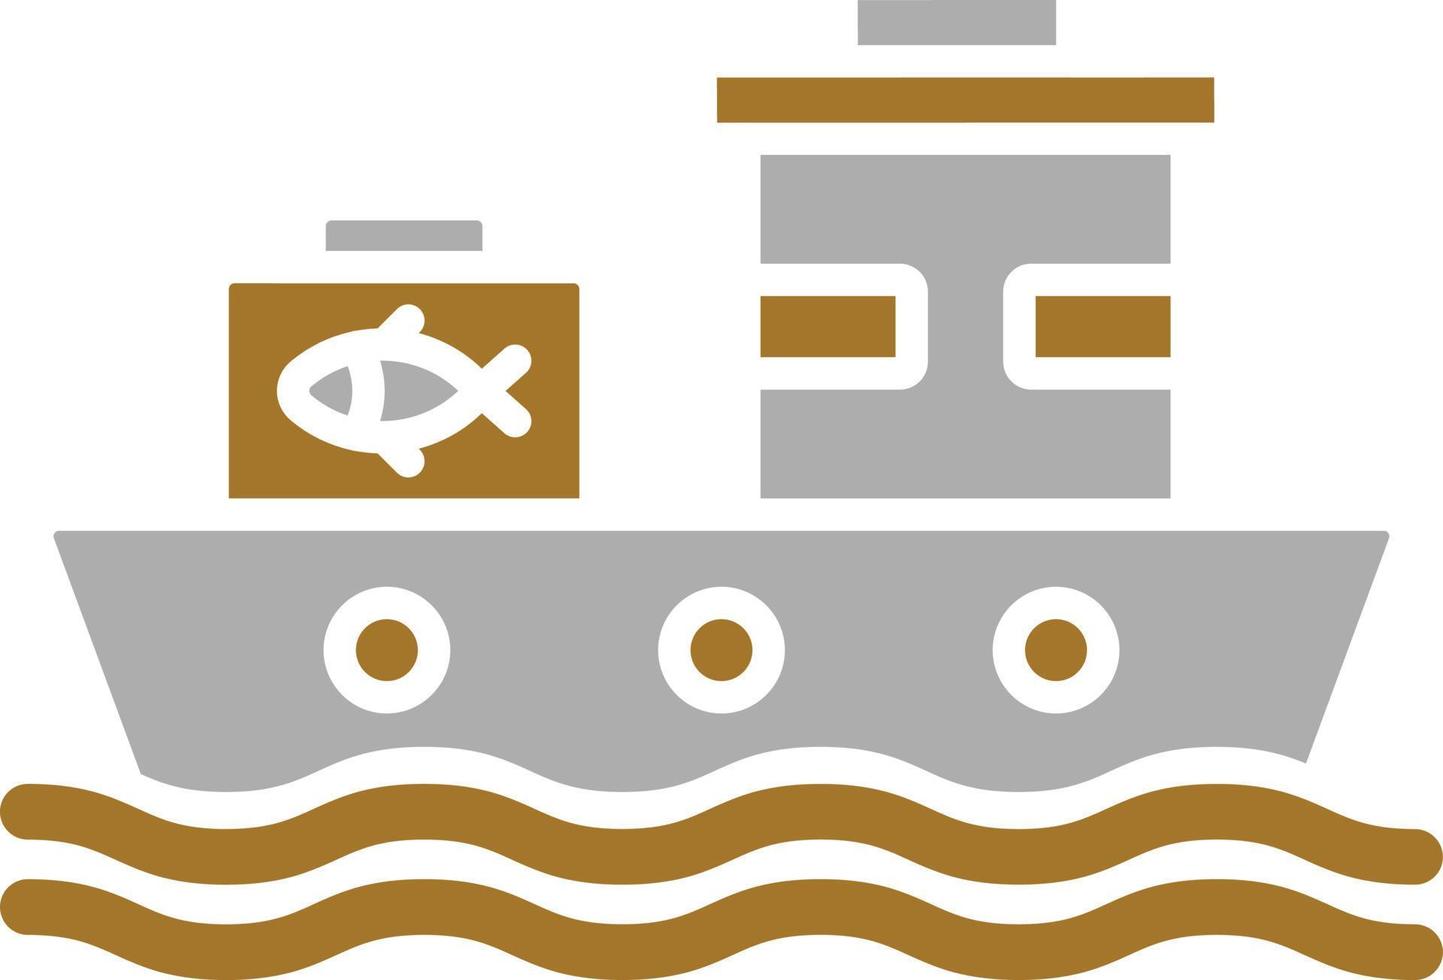 Fishing Boat Icon Style vector